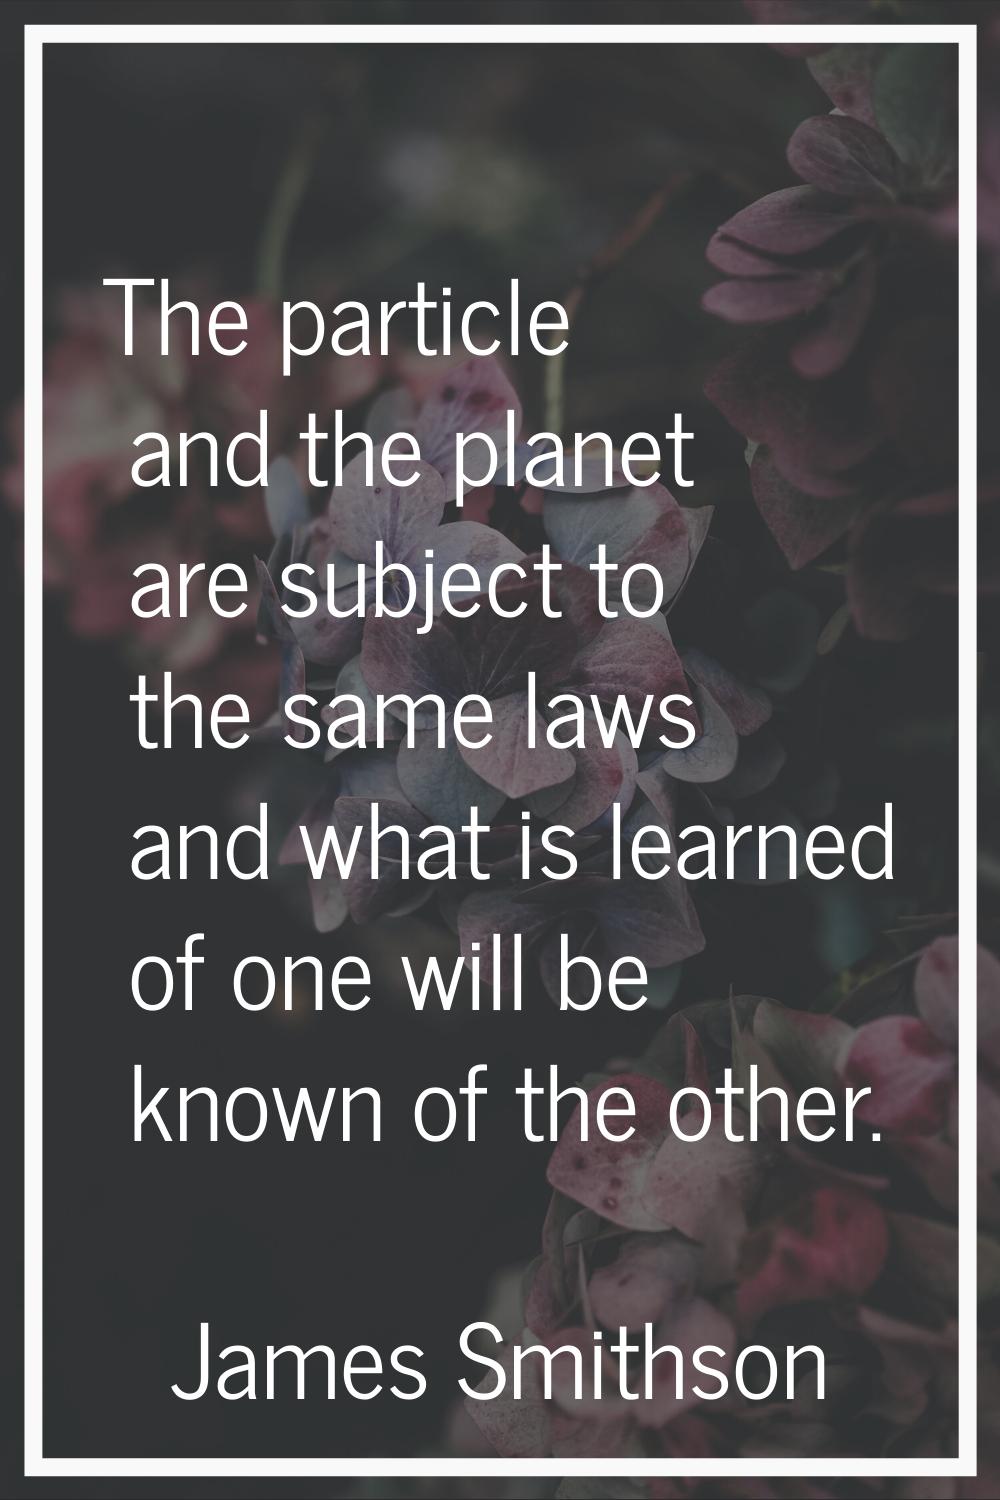 The particle and the planet are subject to the same laws and what is learned of one will be known o